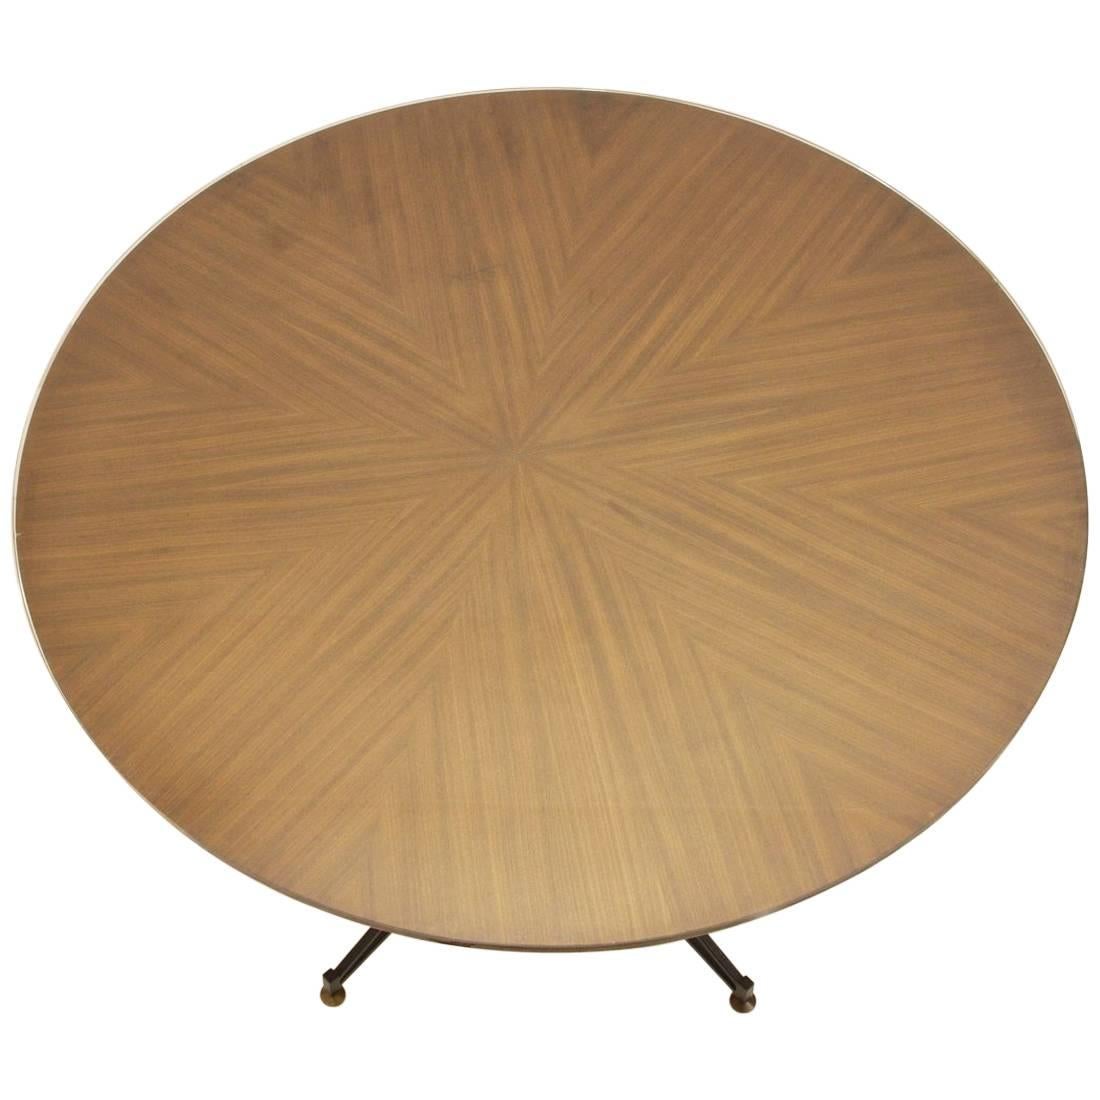 Italian Round Dining Table by Carlo Ratti, 1950s